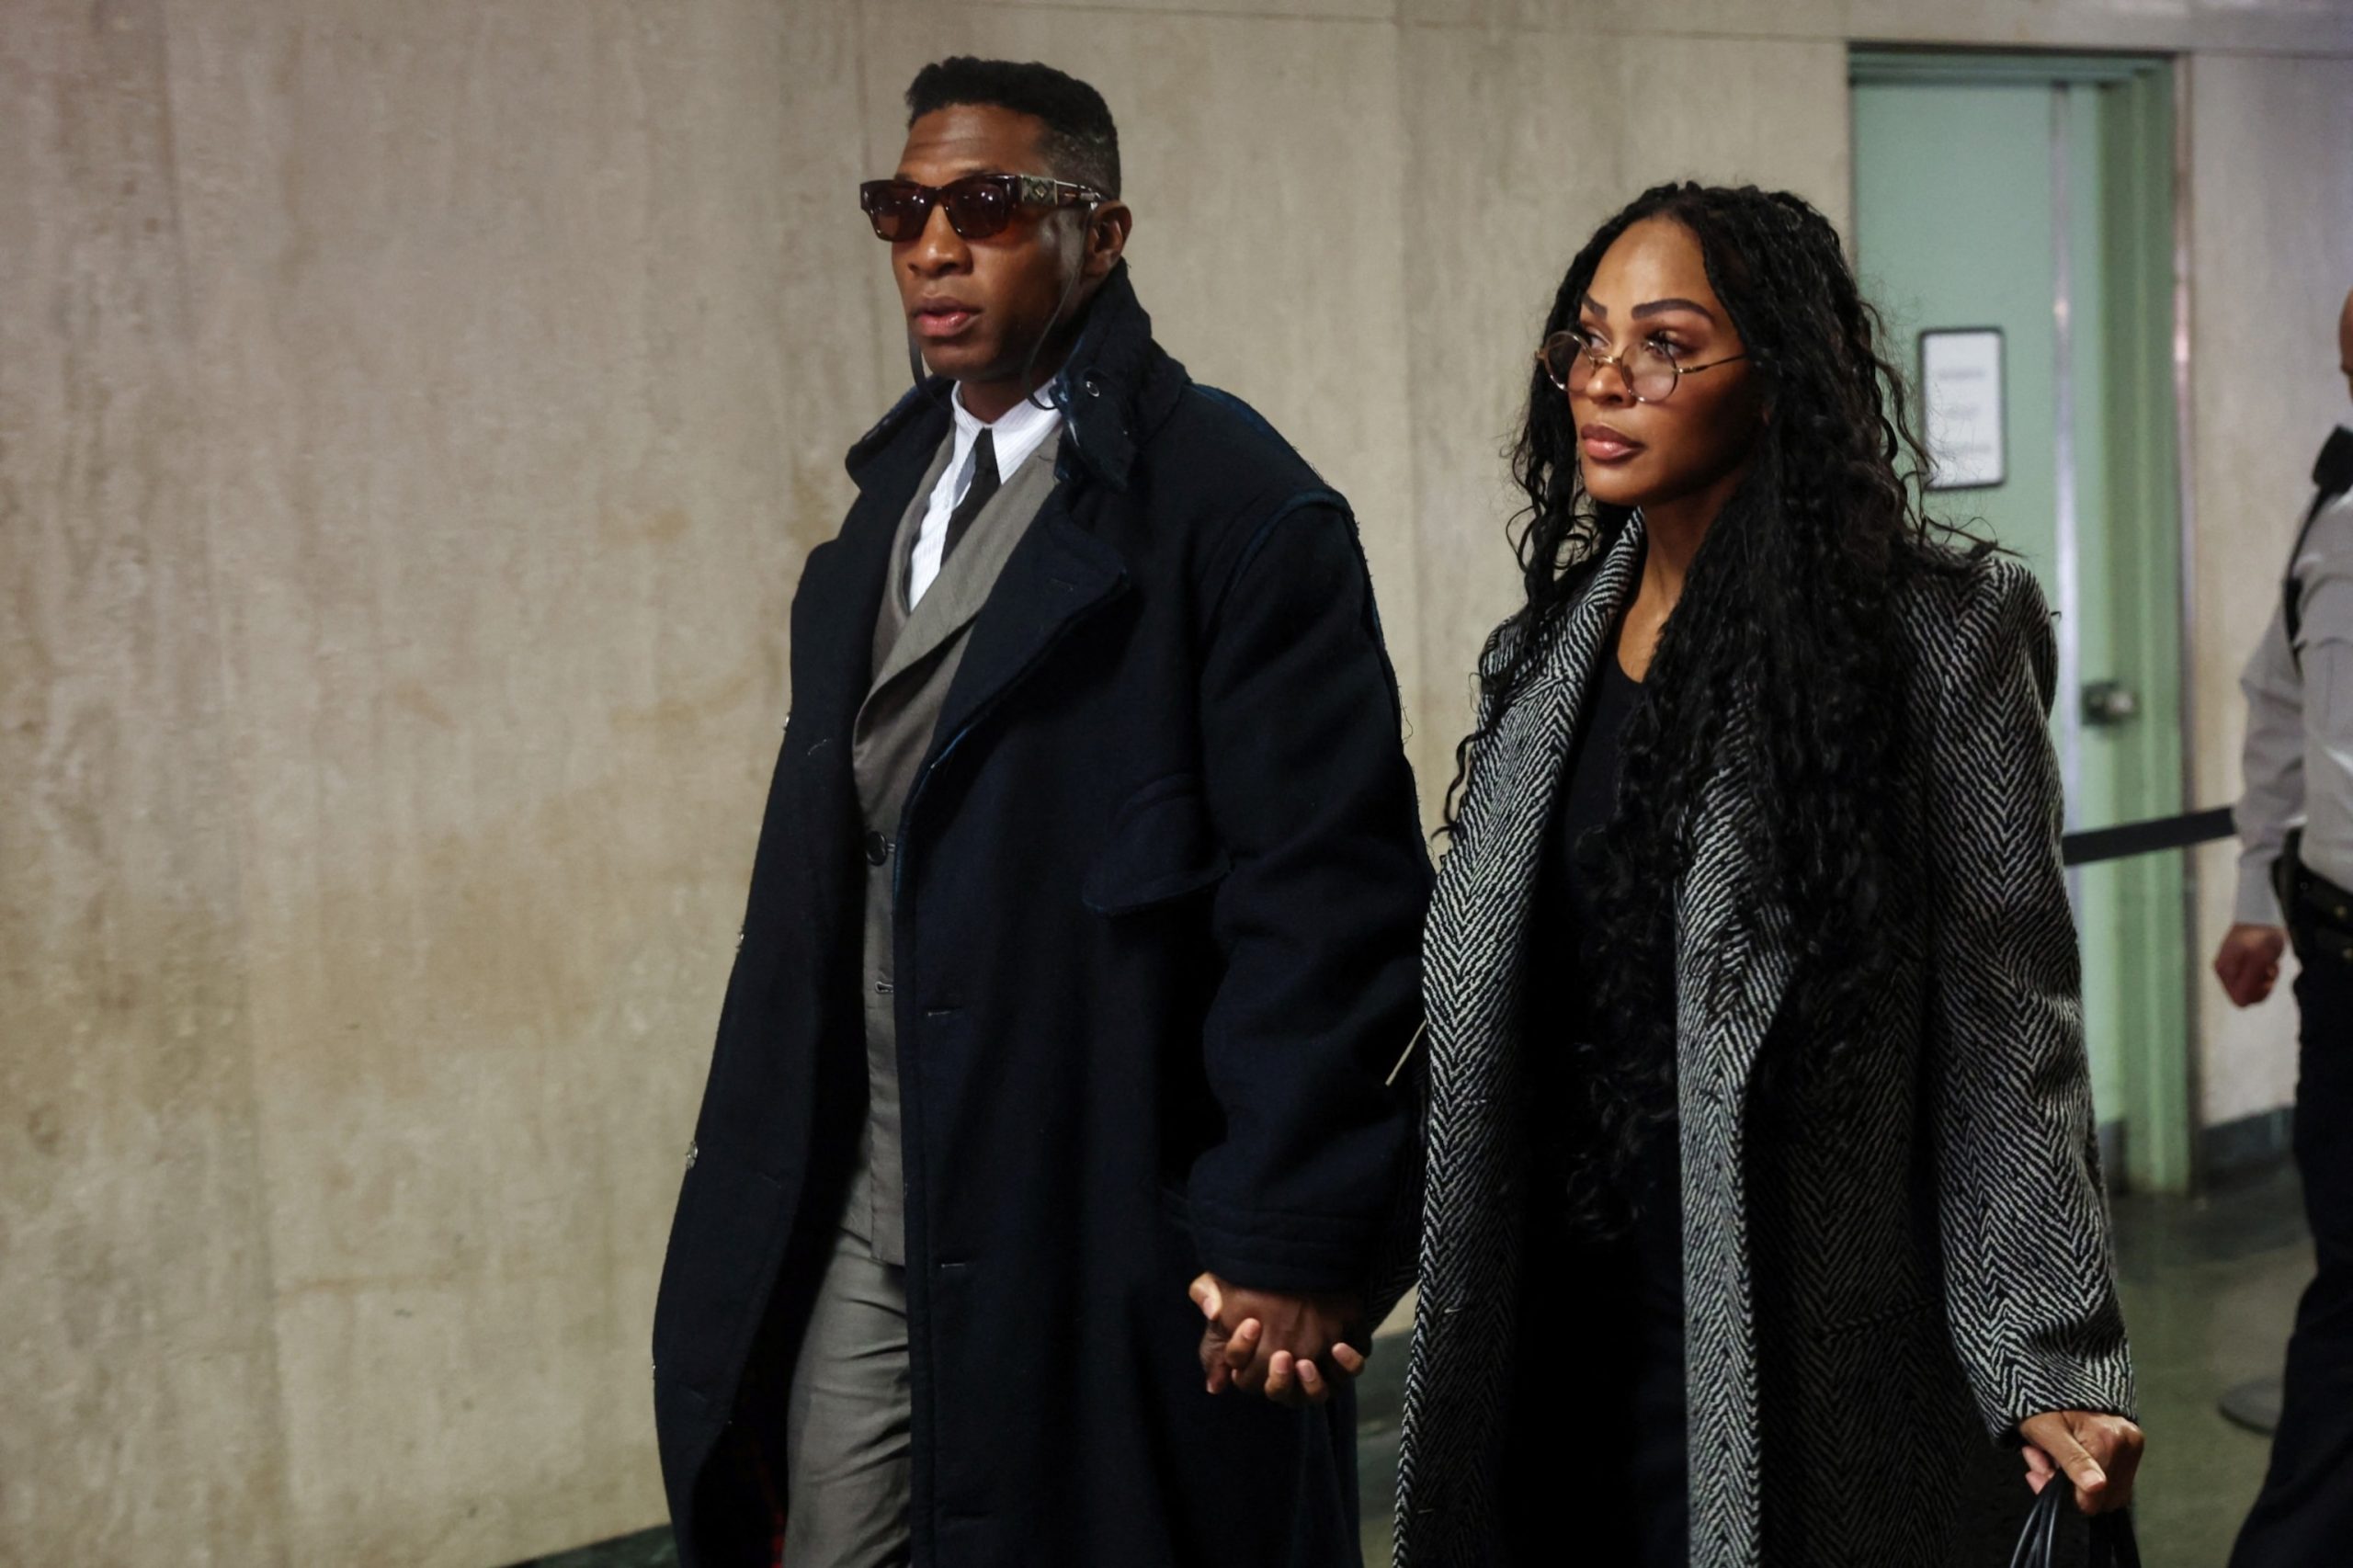 Trial Commences for Actor Jonathan Majors on Domestic Violence Allegations